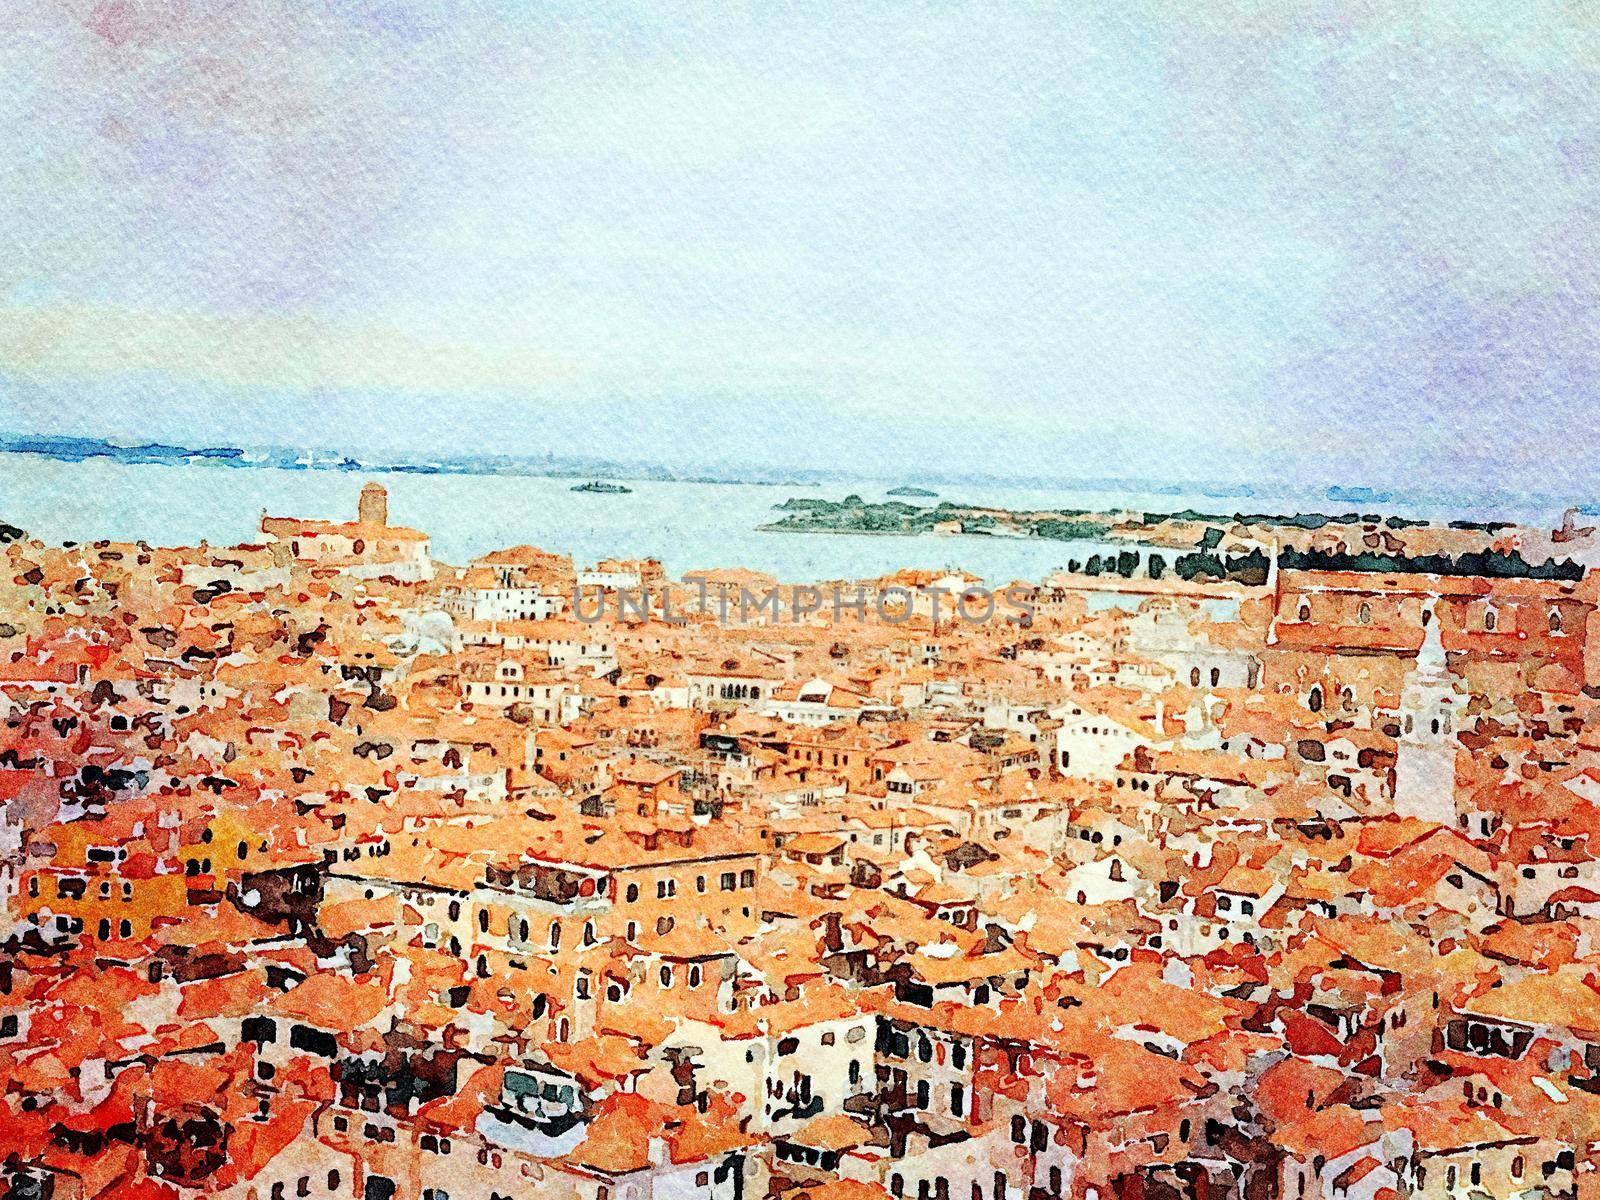 Watercolor representing the panorama of the roofs of Venice and the lagoon in the background